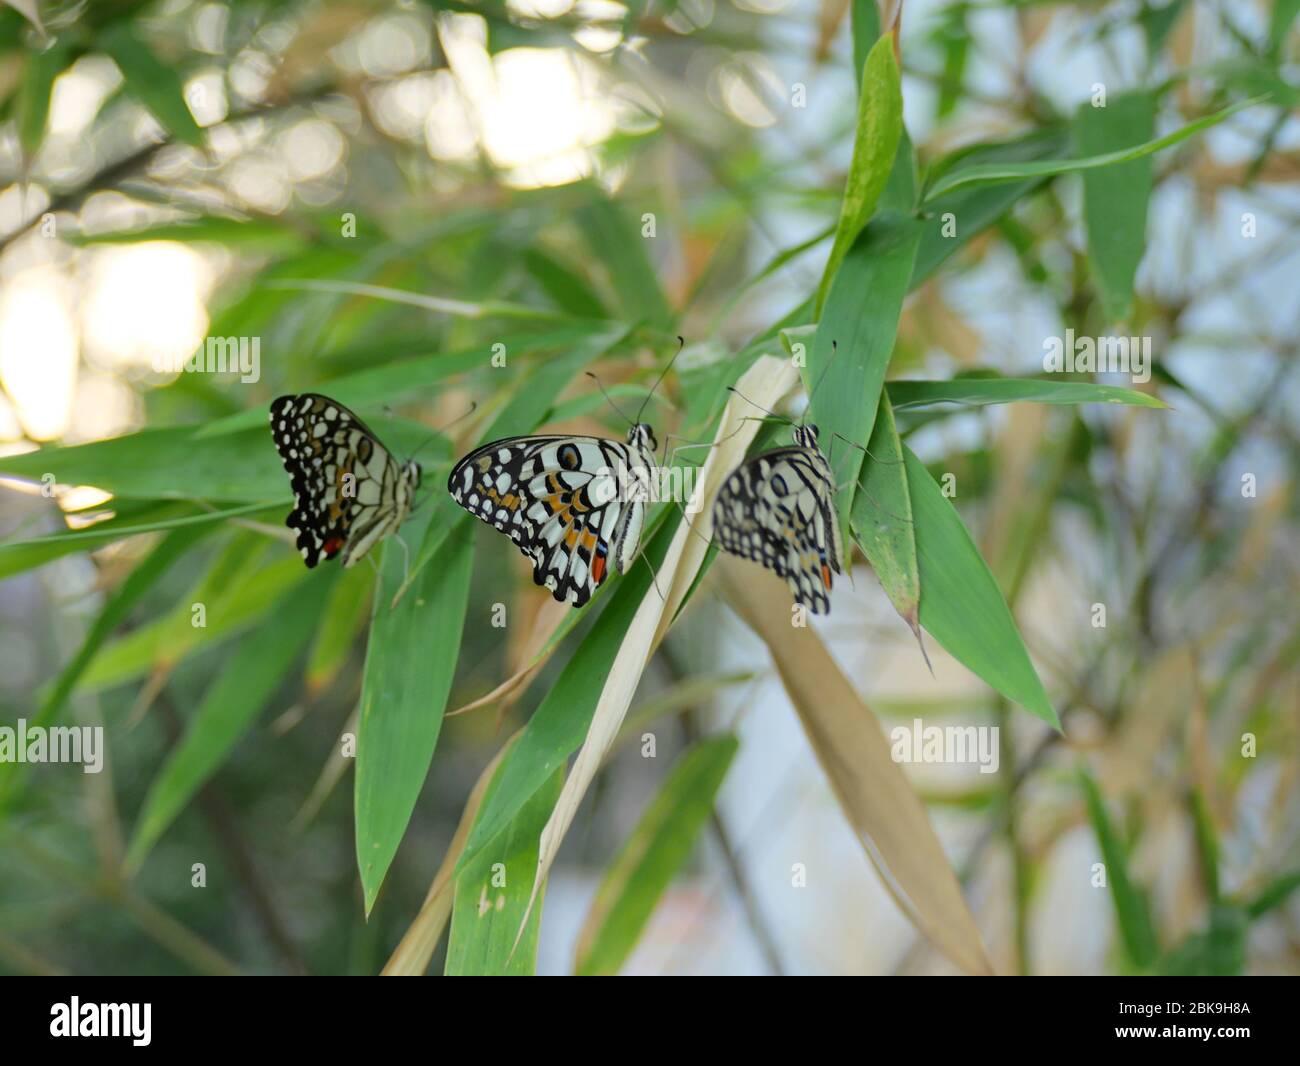 Three beautiful lime butterflies, lemon butterfly, or chequered swallowtail (Papilio demoleus) on bamboo tree by the fence Stock Photo